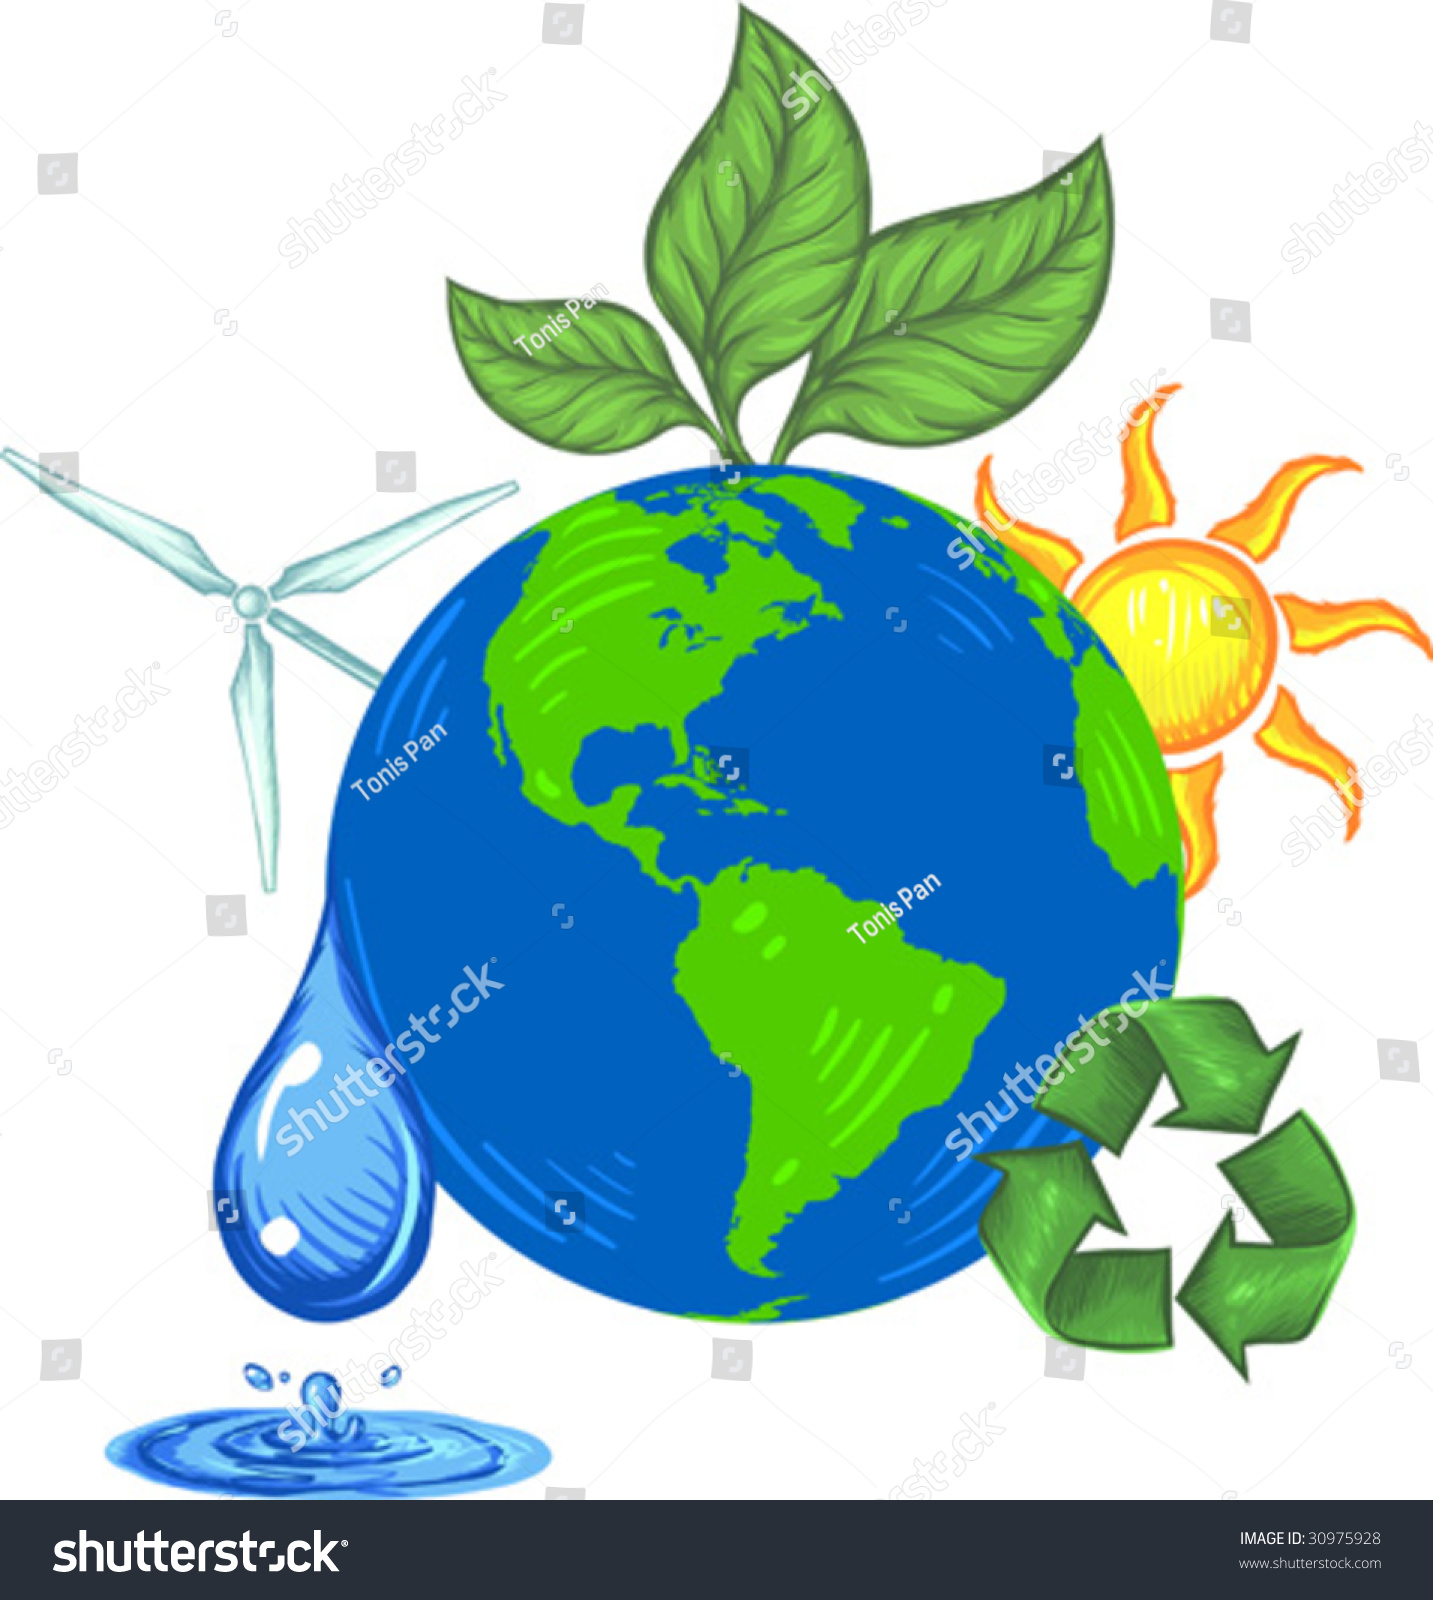 clipart images on save earth - photo #19